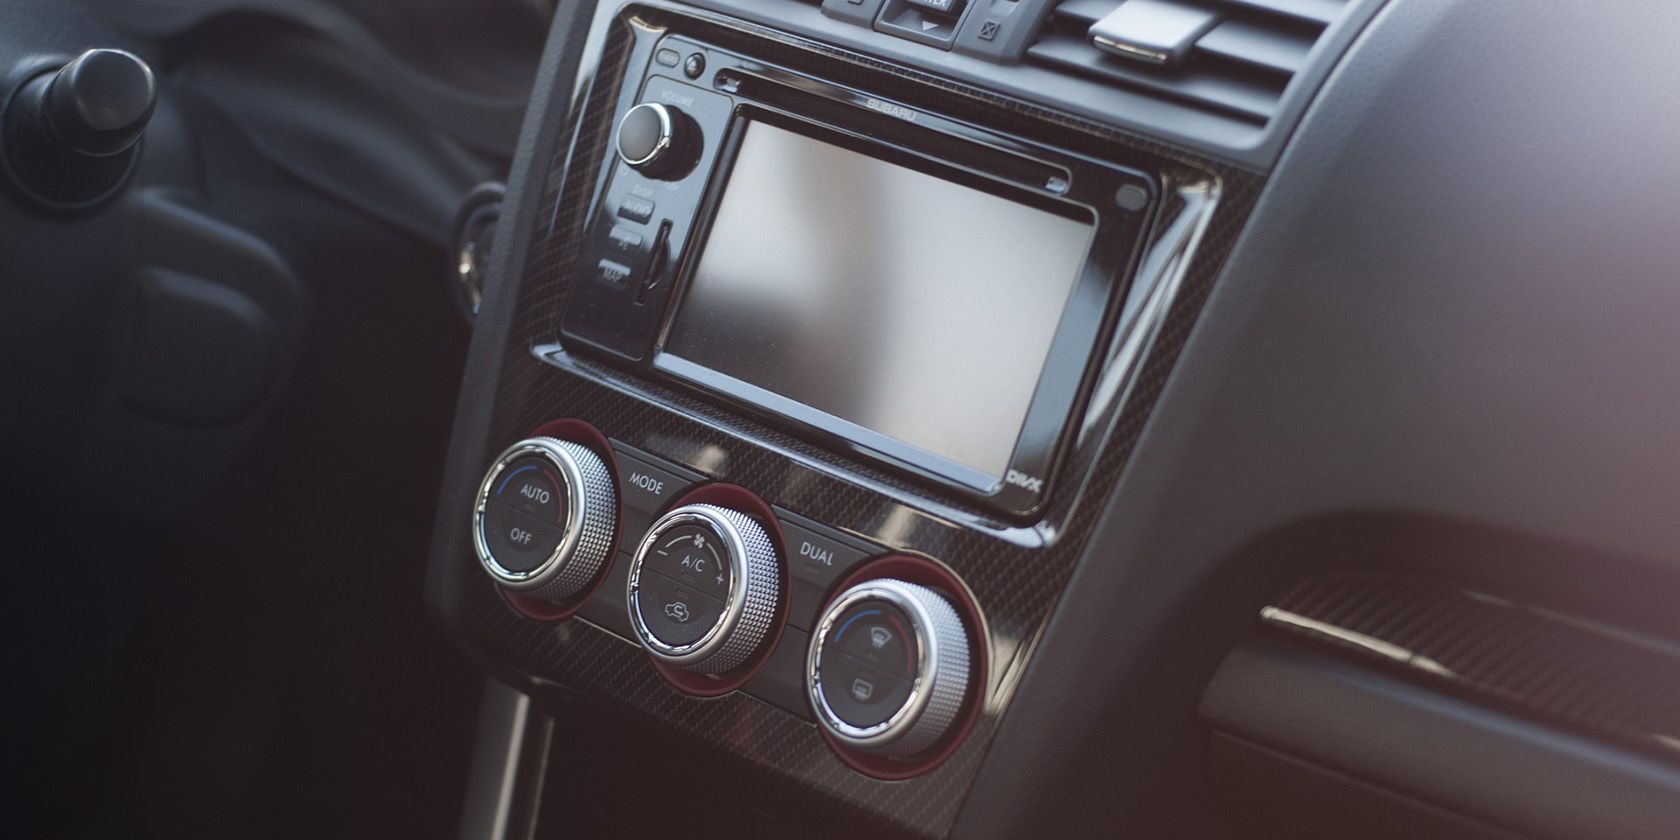 Car dash showing infotainment unit and climate control knobs 